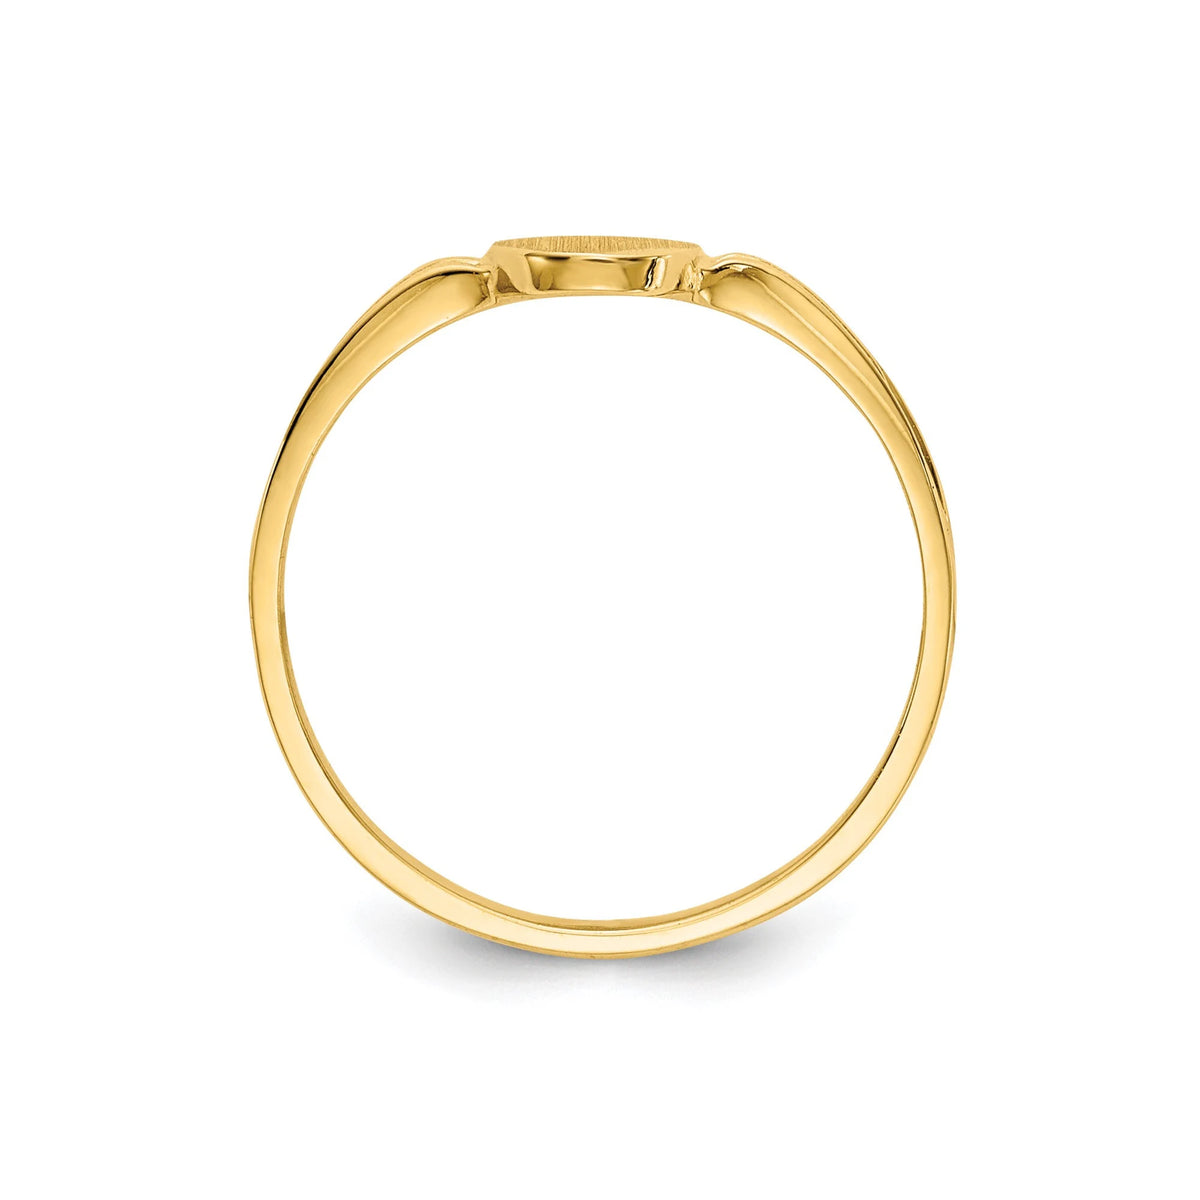 Genuine 14k Yellow Gold Signet Ring Baby to Toddler / Band Size 1- 4 (1-5 year olds) Toddler Size Children's Ring Band